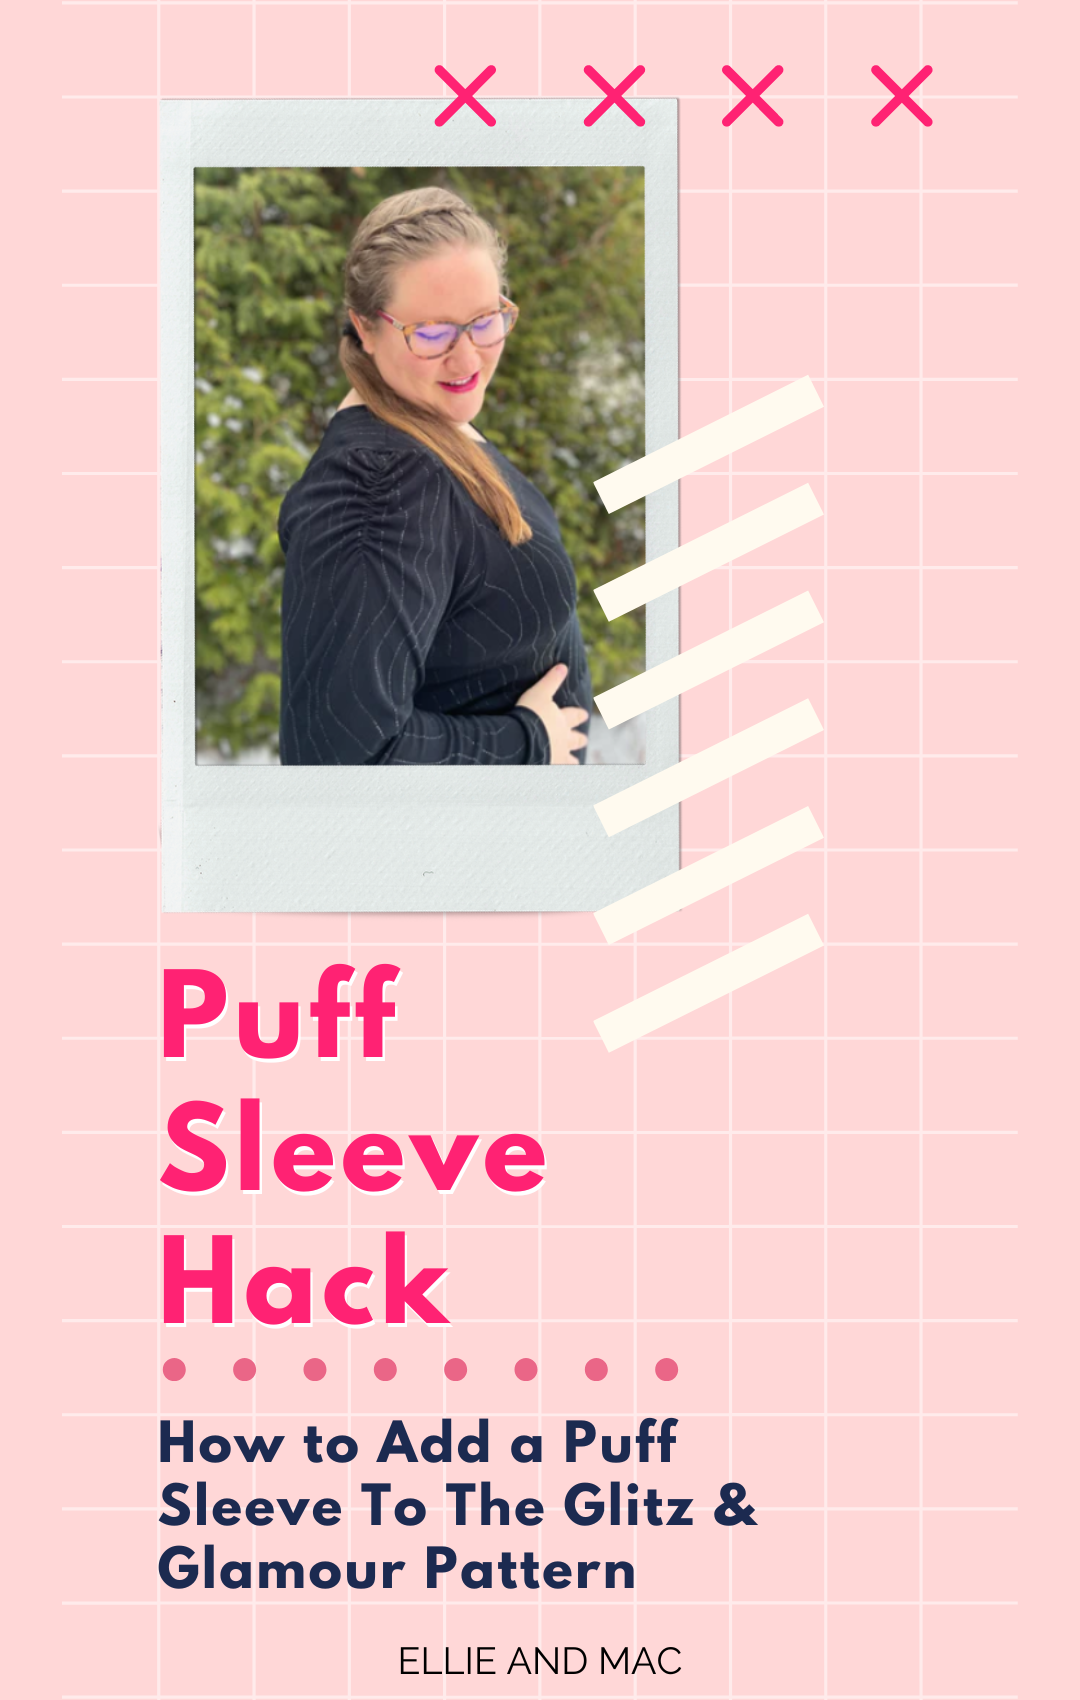 Puff Sleeve Hack for the The Glitz & Glamour Pattern